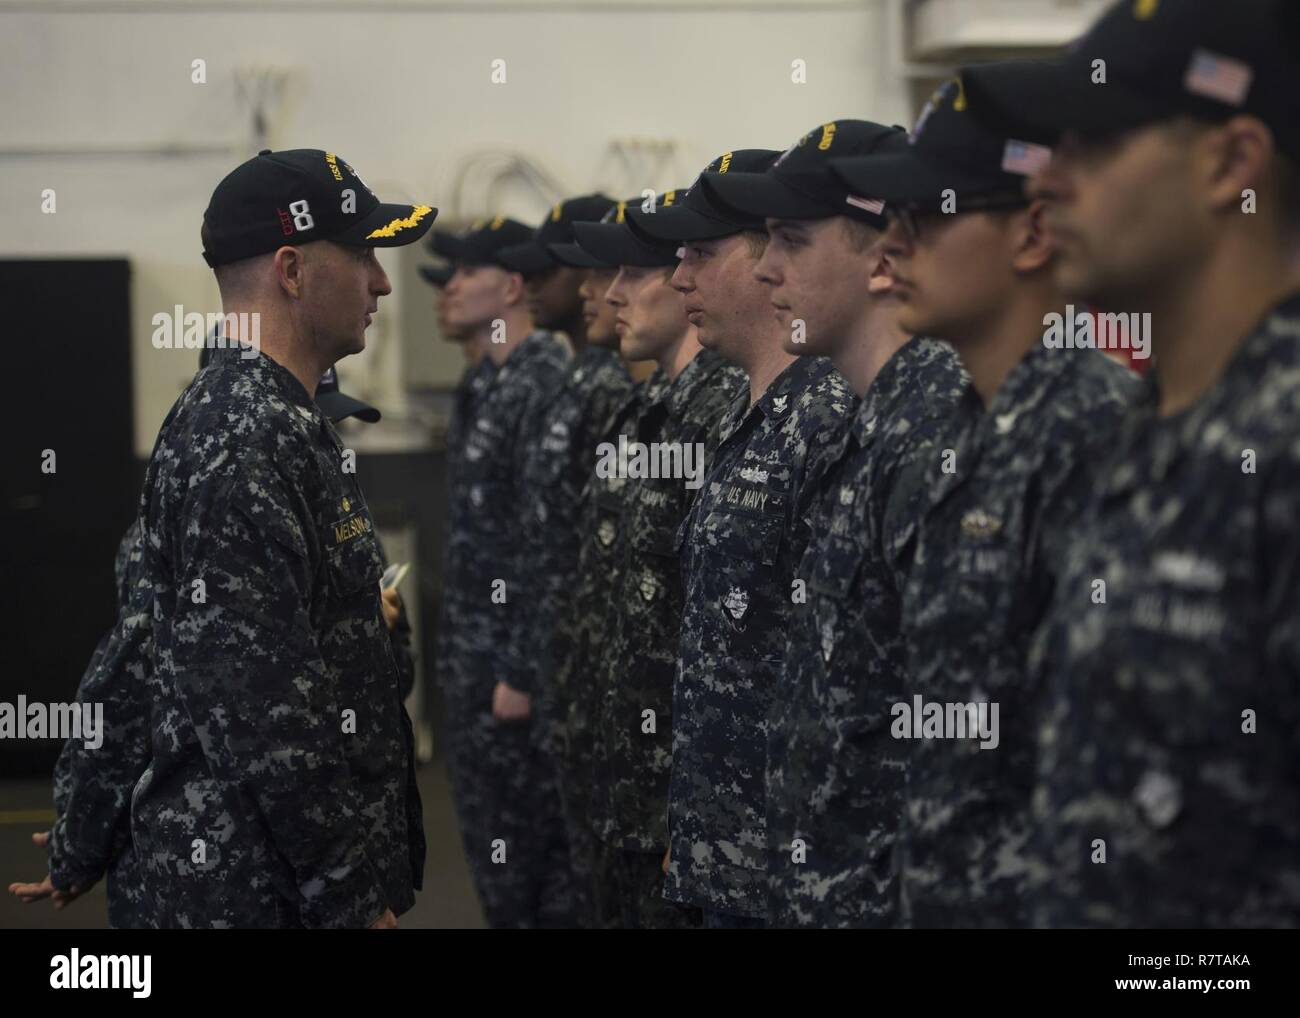 SOUTH CHINA SEA (April 6, 2017) Capt. Mark A. Melson, commanding officer of the amphibious assault ship USS Makin Island (LHD 8), inspects engineering department Sailors in the hangar bay. The ship is the flagship of its amphibious ready group, which is operating in the Indo-Asia-Pacific region to enhance amphibious capability with regional partners and to serve as a ready-response force for any type of contingency. Stock Photo